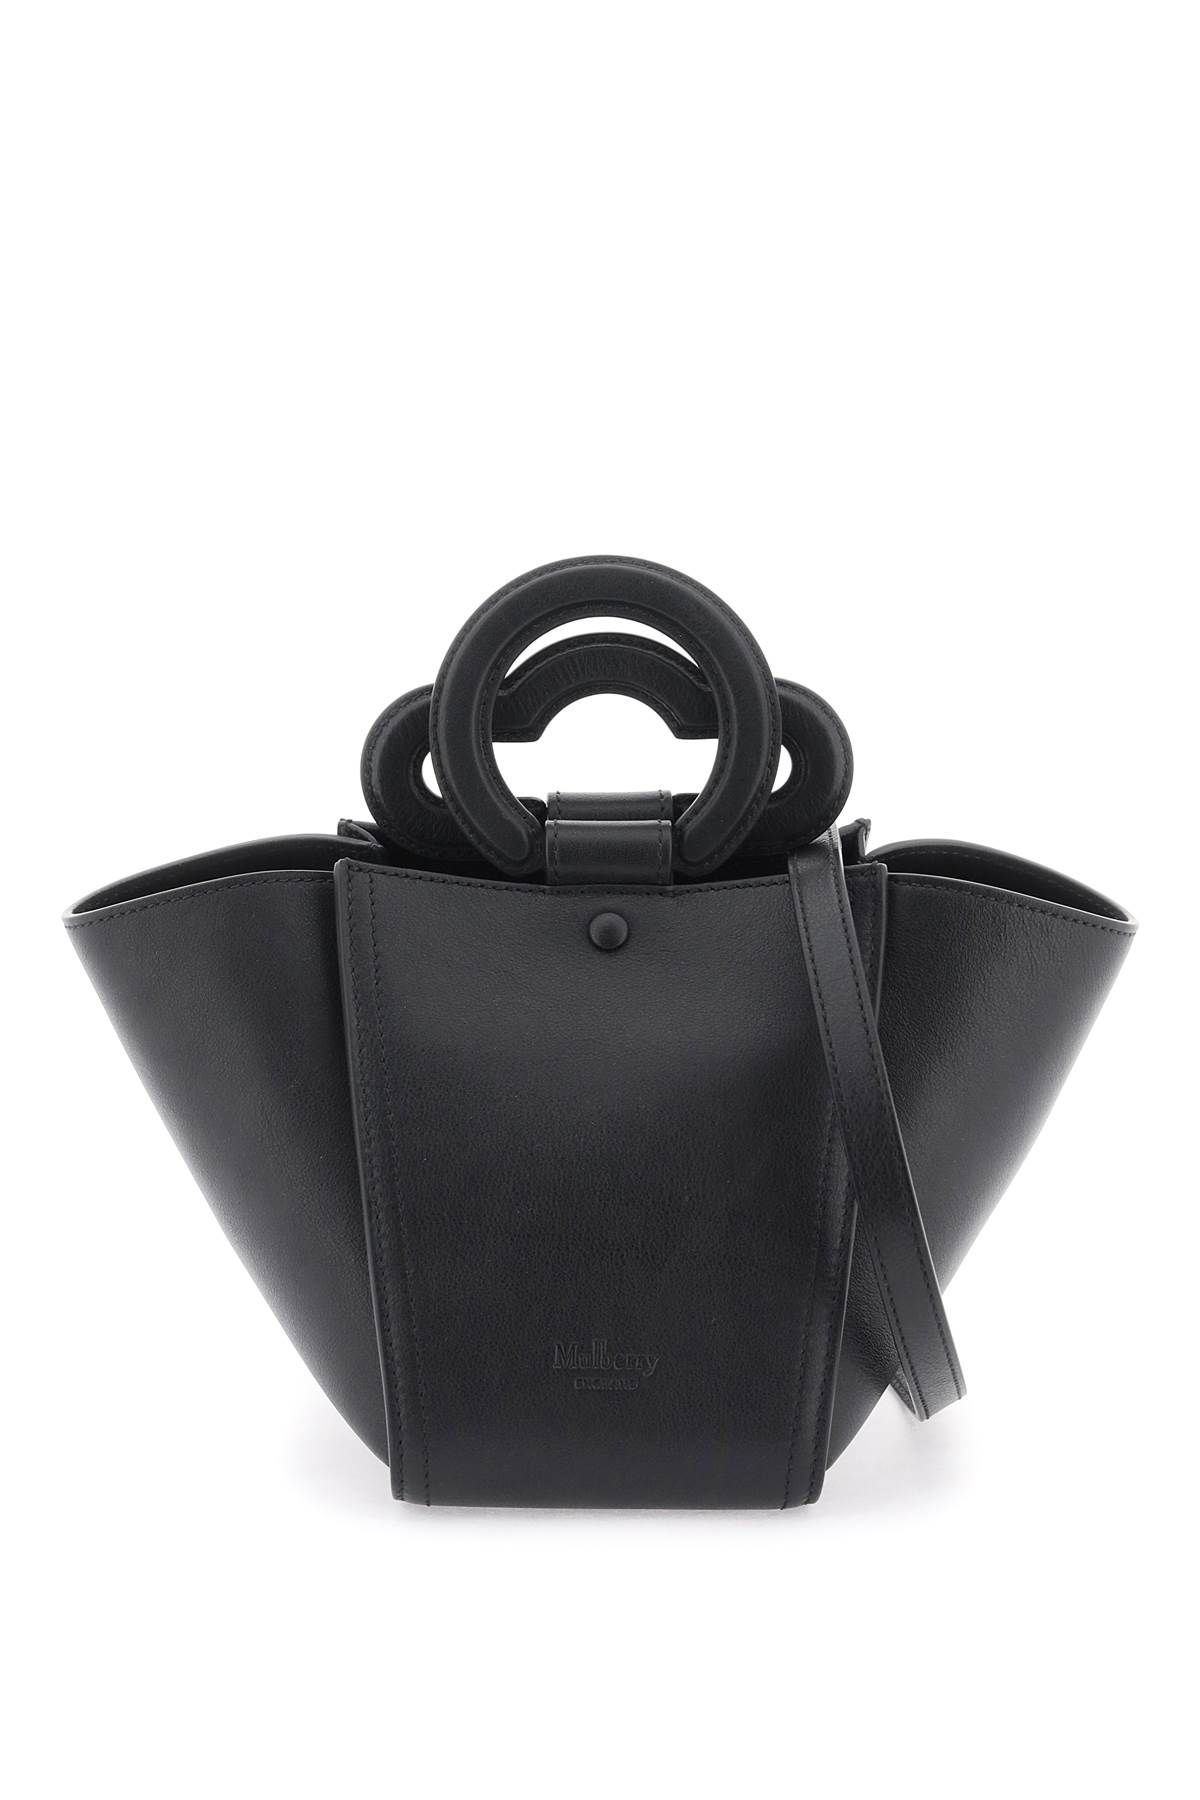 Mulberry MULBERRY 'mini rider's top handle' bag